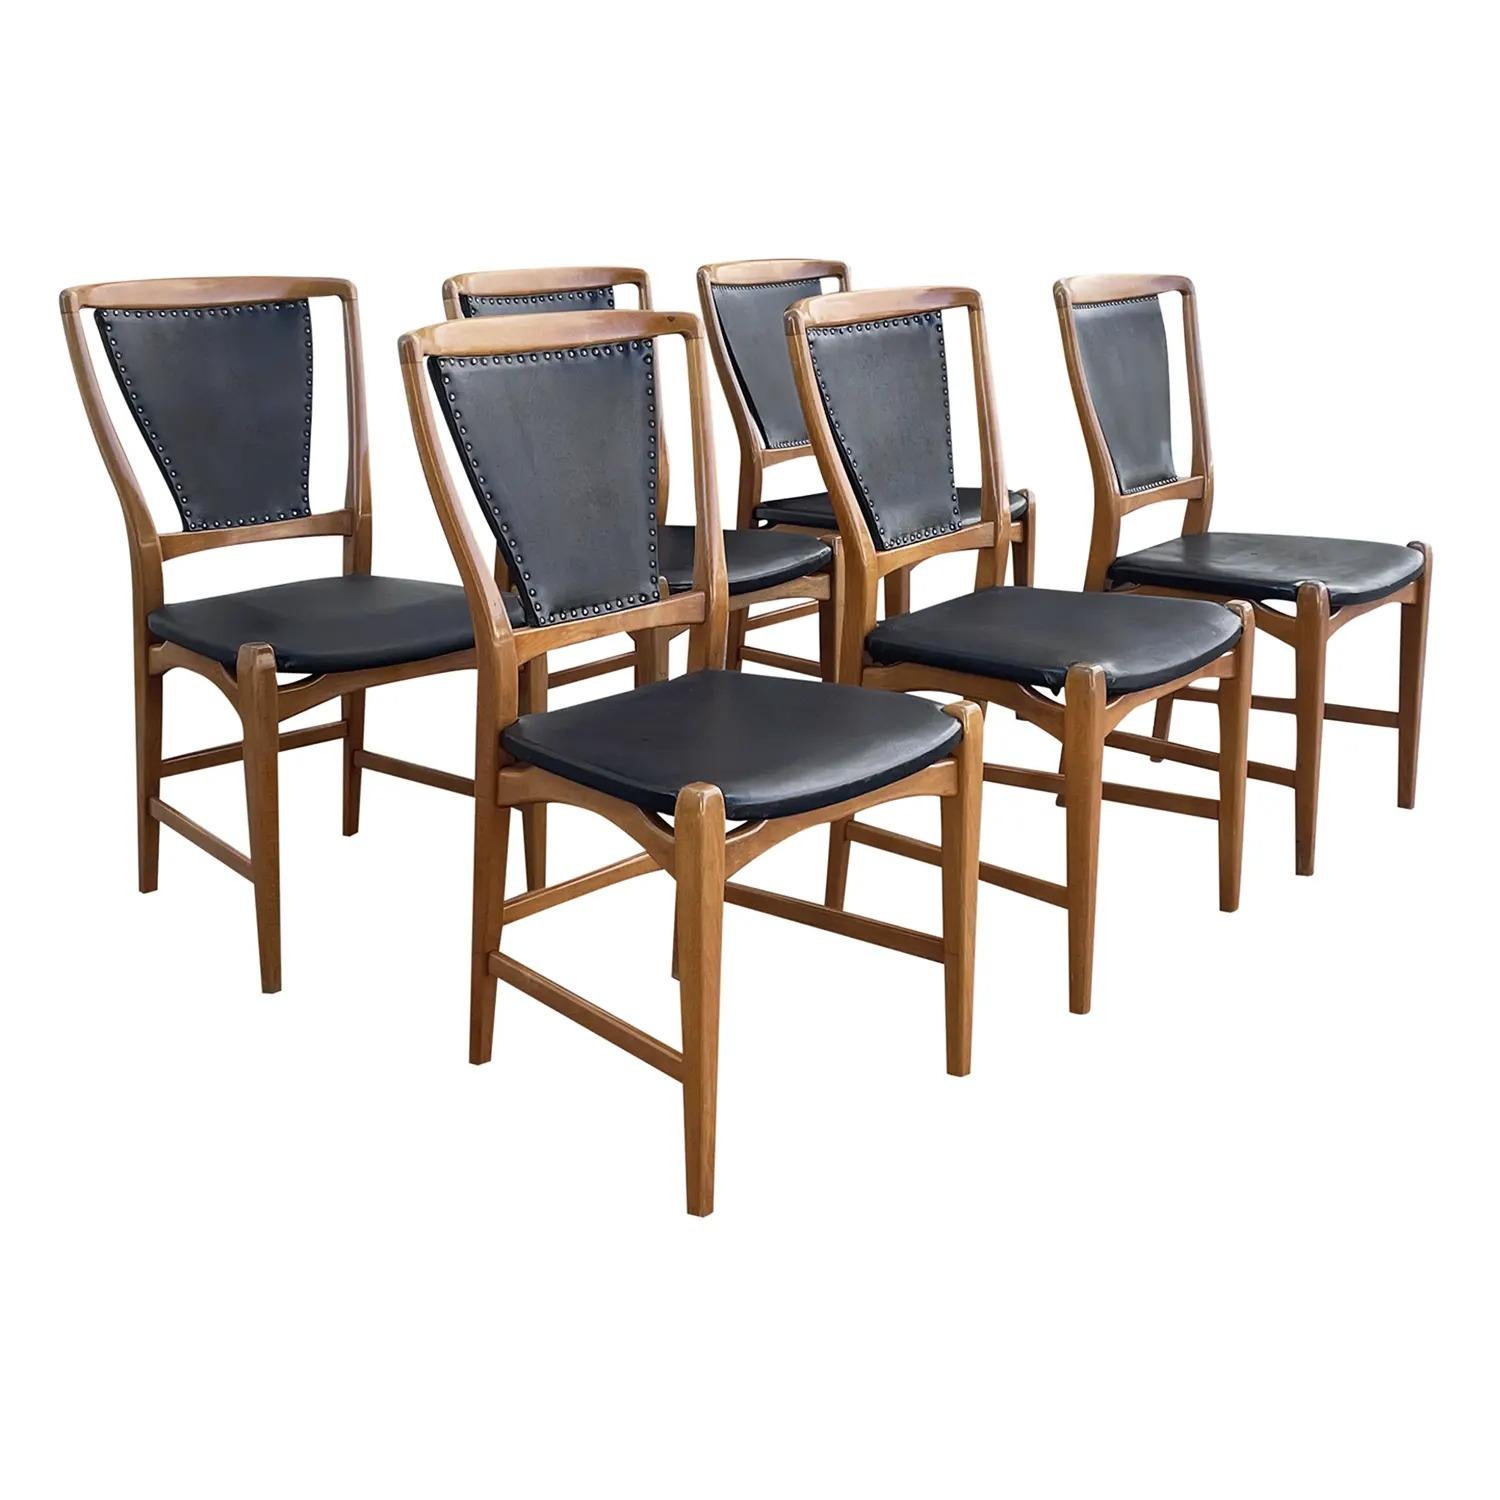 A black, vintage Mid-Century Modern Swedish set of six dining chairs made of hand carved Pearwood, designed and produced by an unknown architect from Stockholm, in good condition. The seat, back rest of the Scandinavian side chairs are are